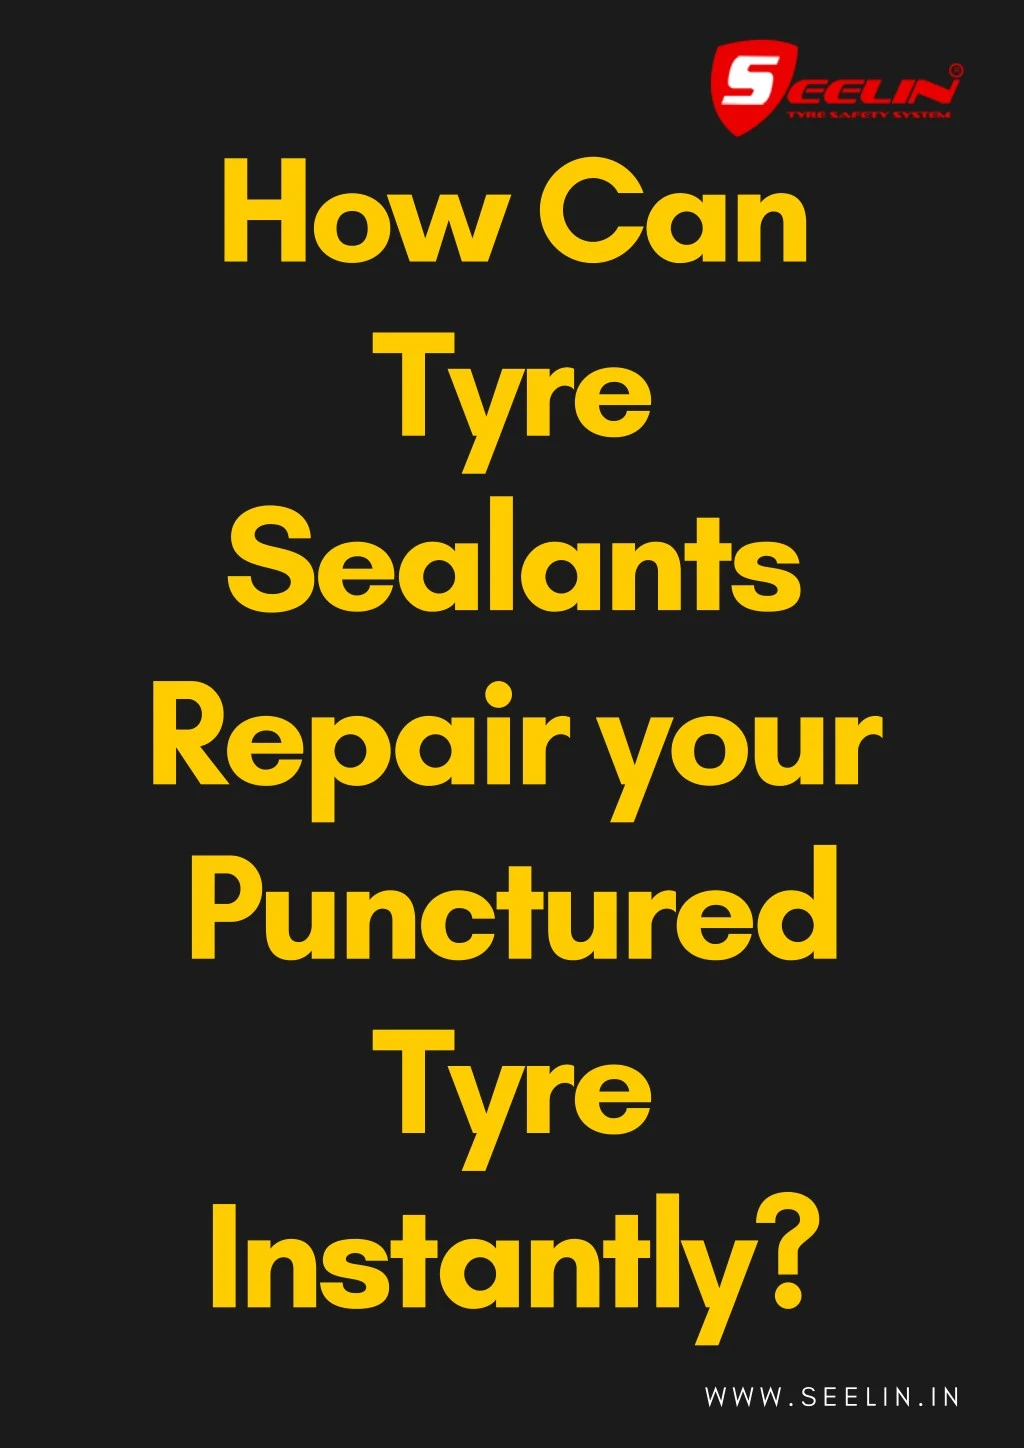 how can tyre sealants repair your punctured tyre